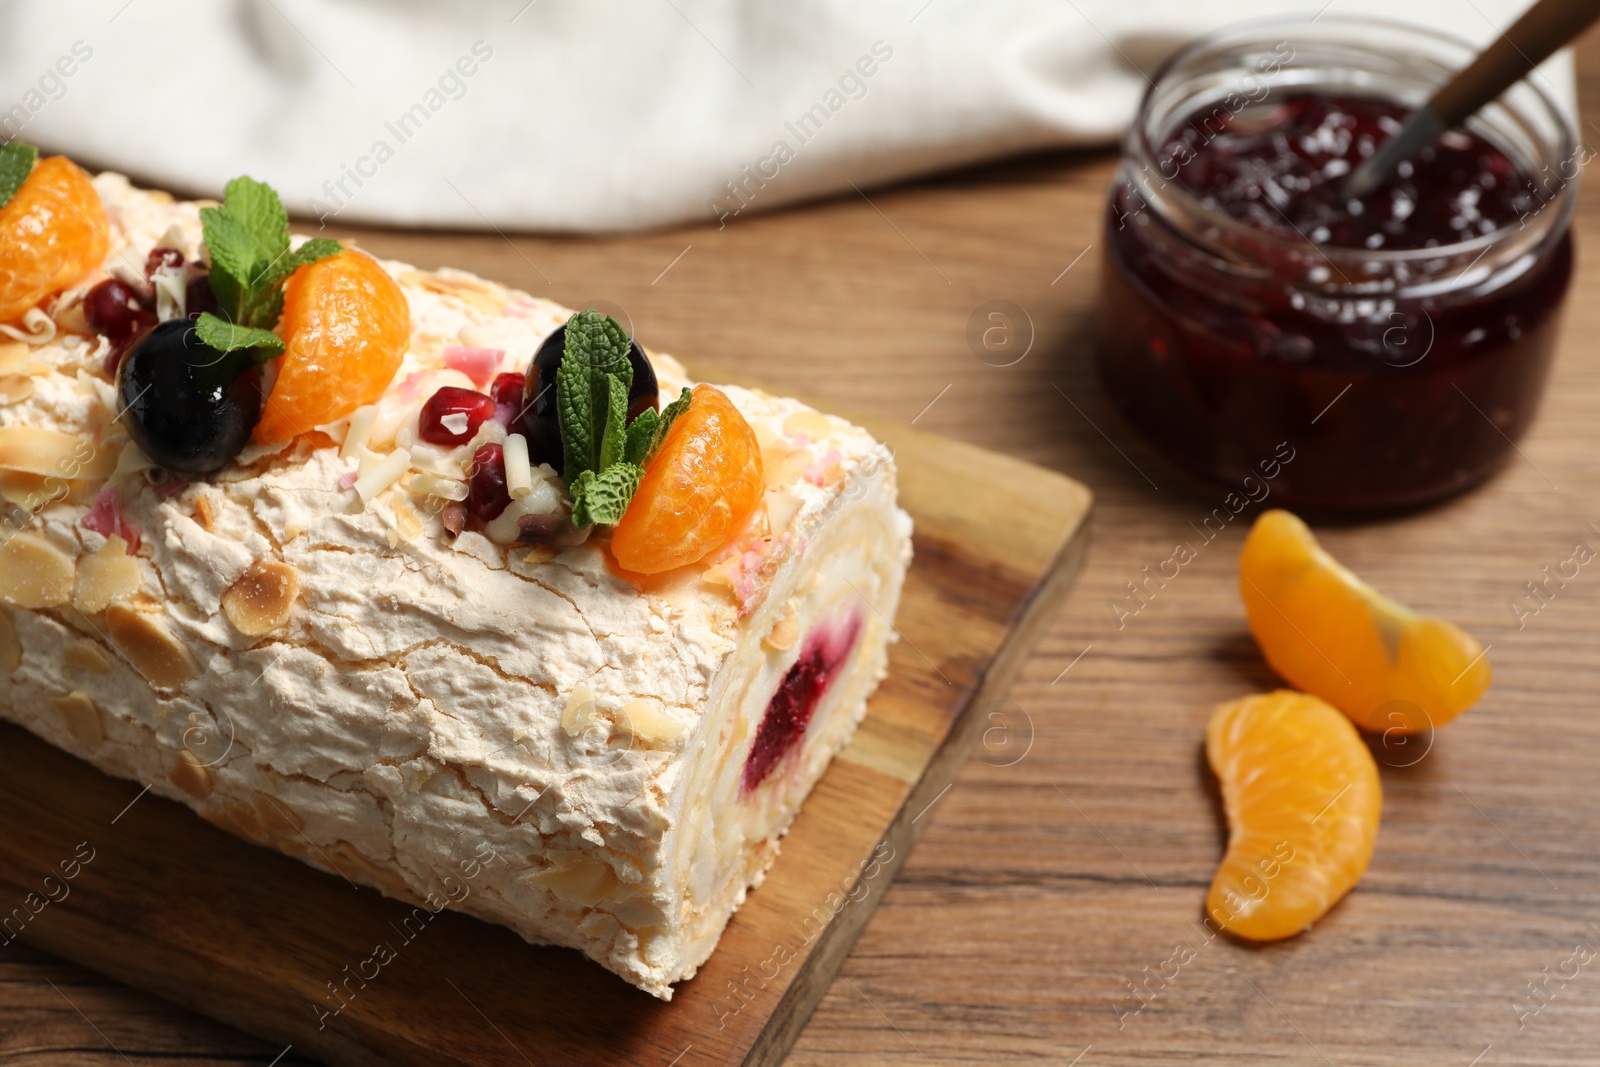 Photo of Tasty meringue roll with jam, tangerine slices and mint leaves on wooden table, closeup